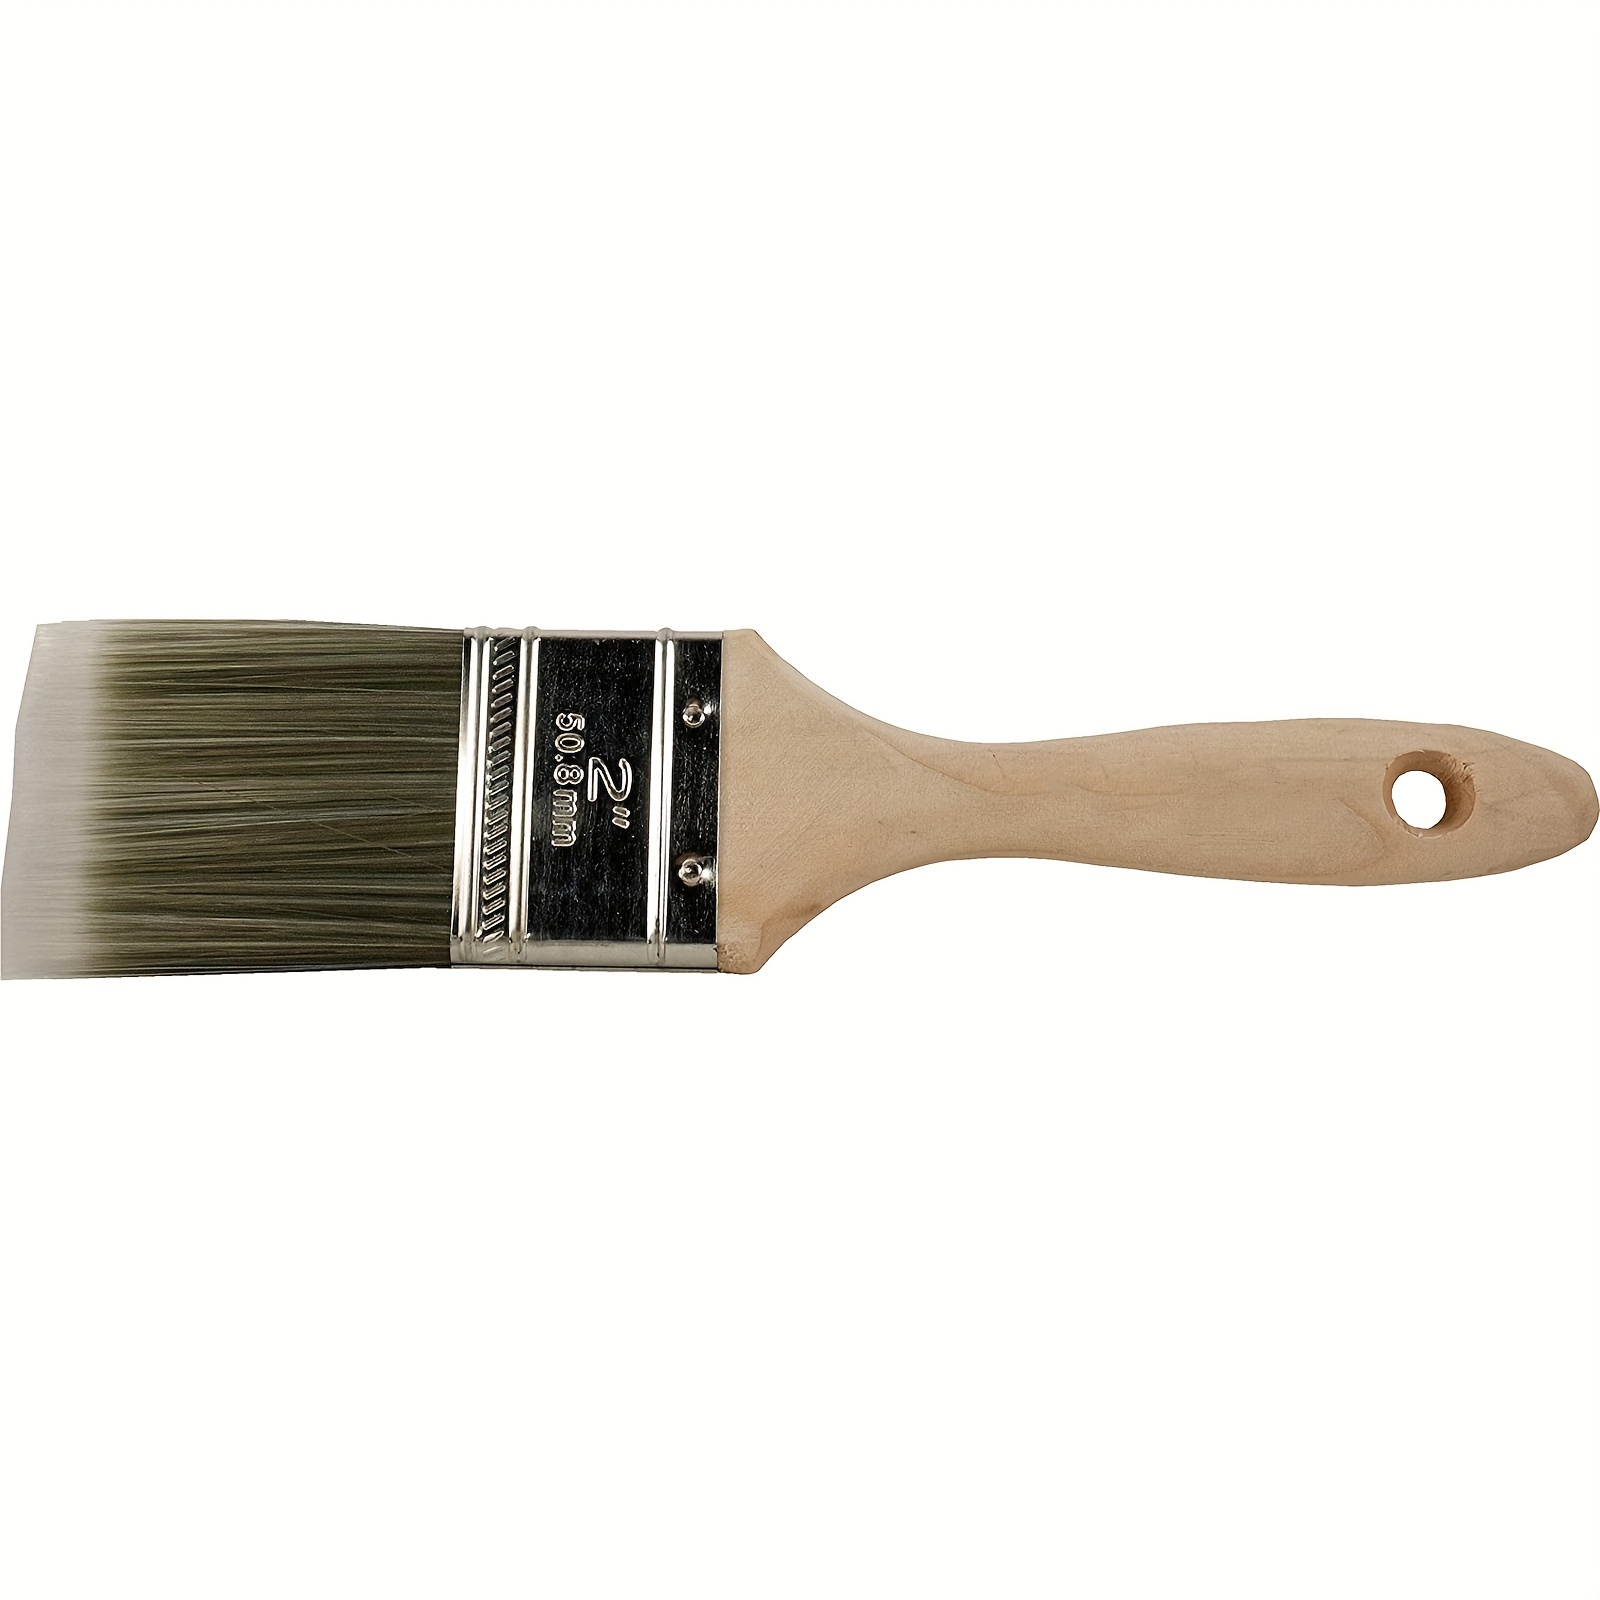 1-1/2 in. Flat Paint Brush, GOOD Quality